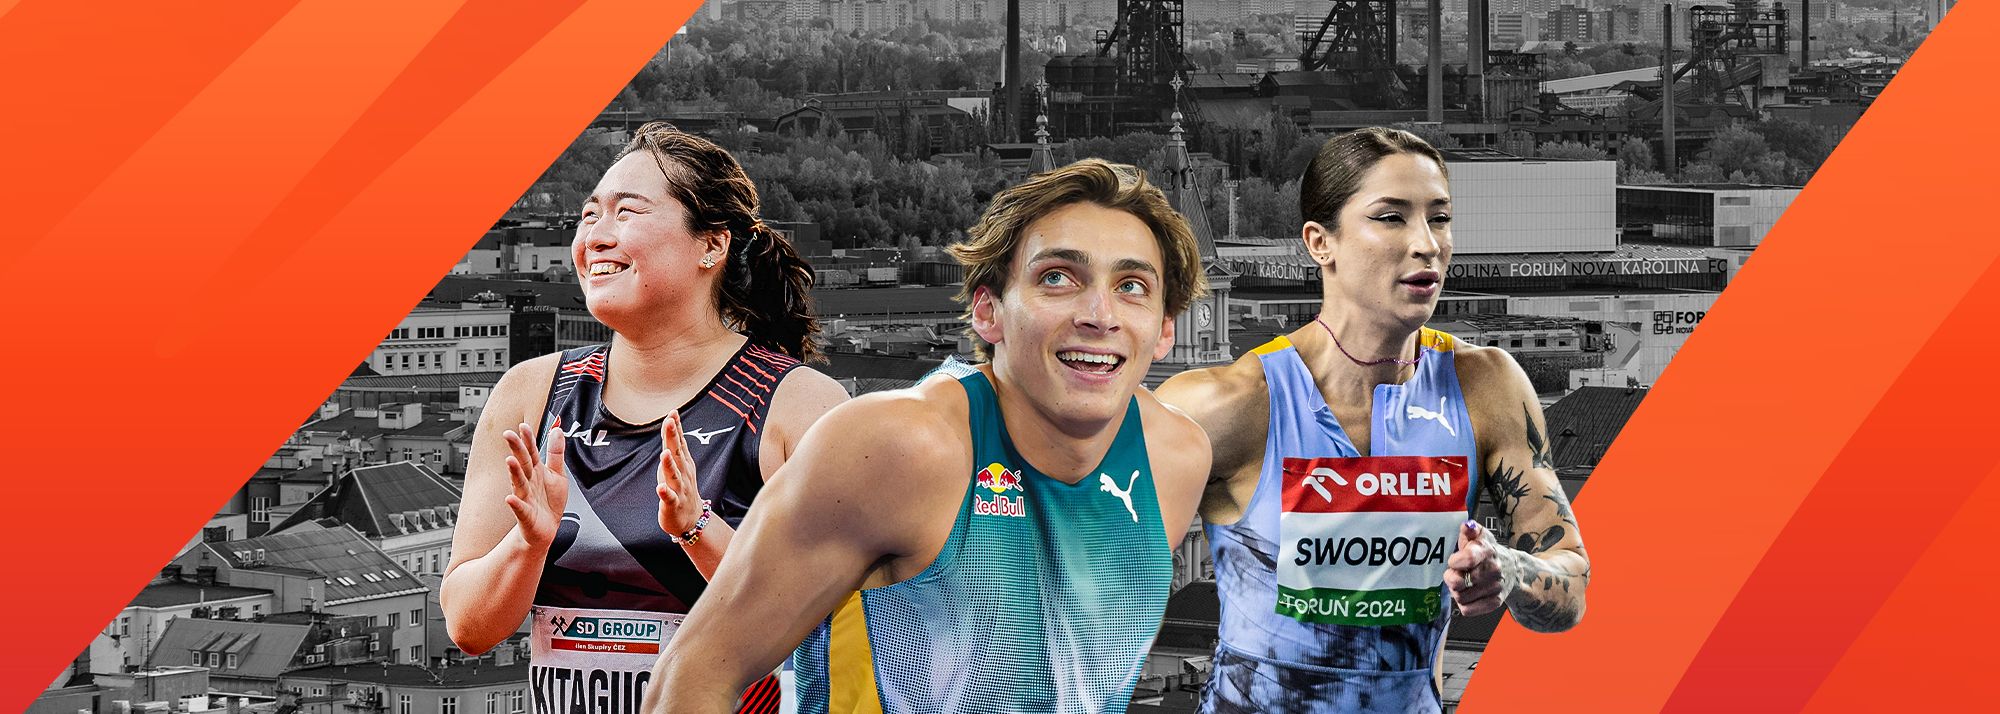 Broadcast info for the Ostrava Golden Spike, taking place on 28 May